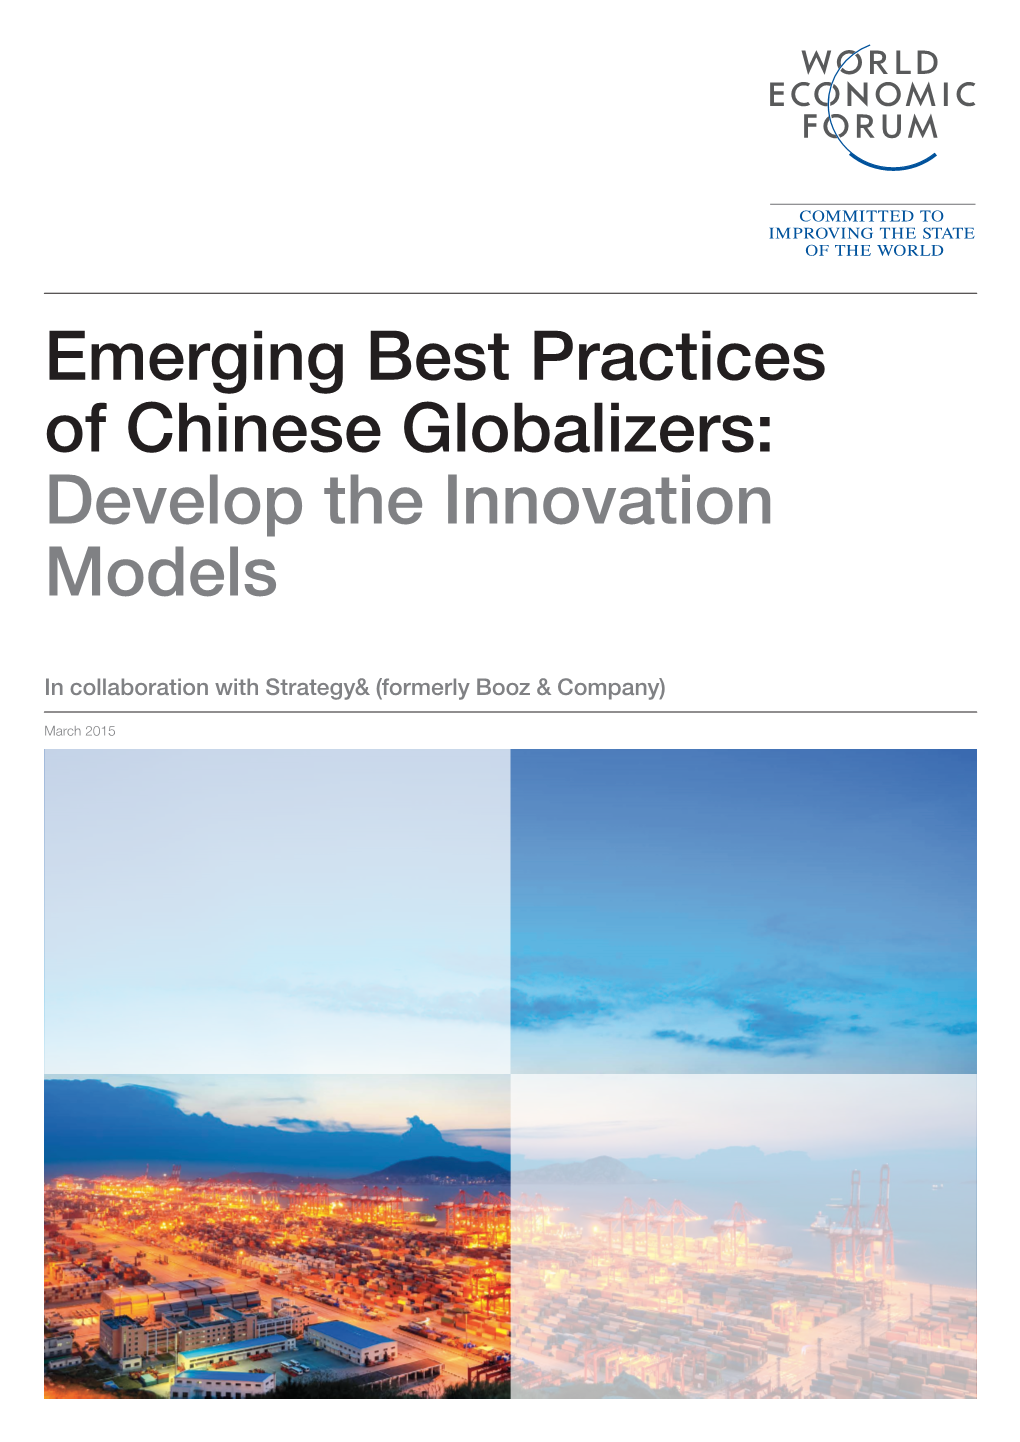 Emerging Best Practices of Chinese Globalizers: Develop the Innovation Models